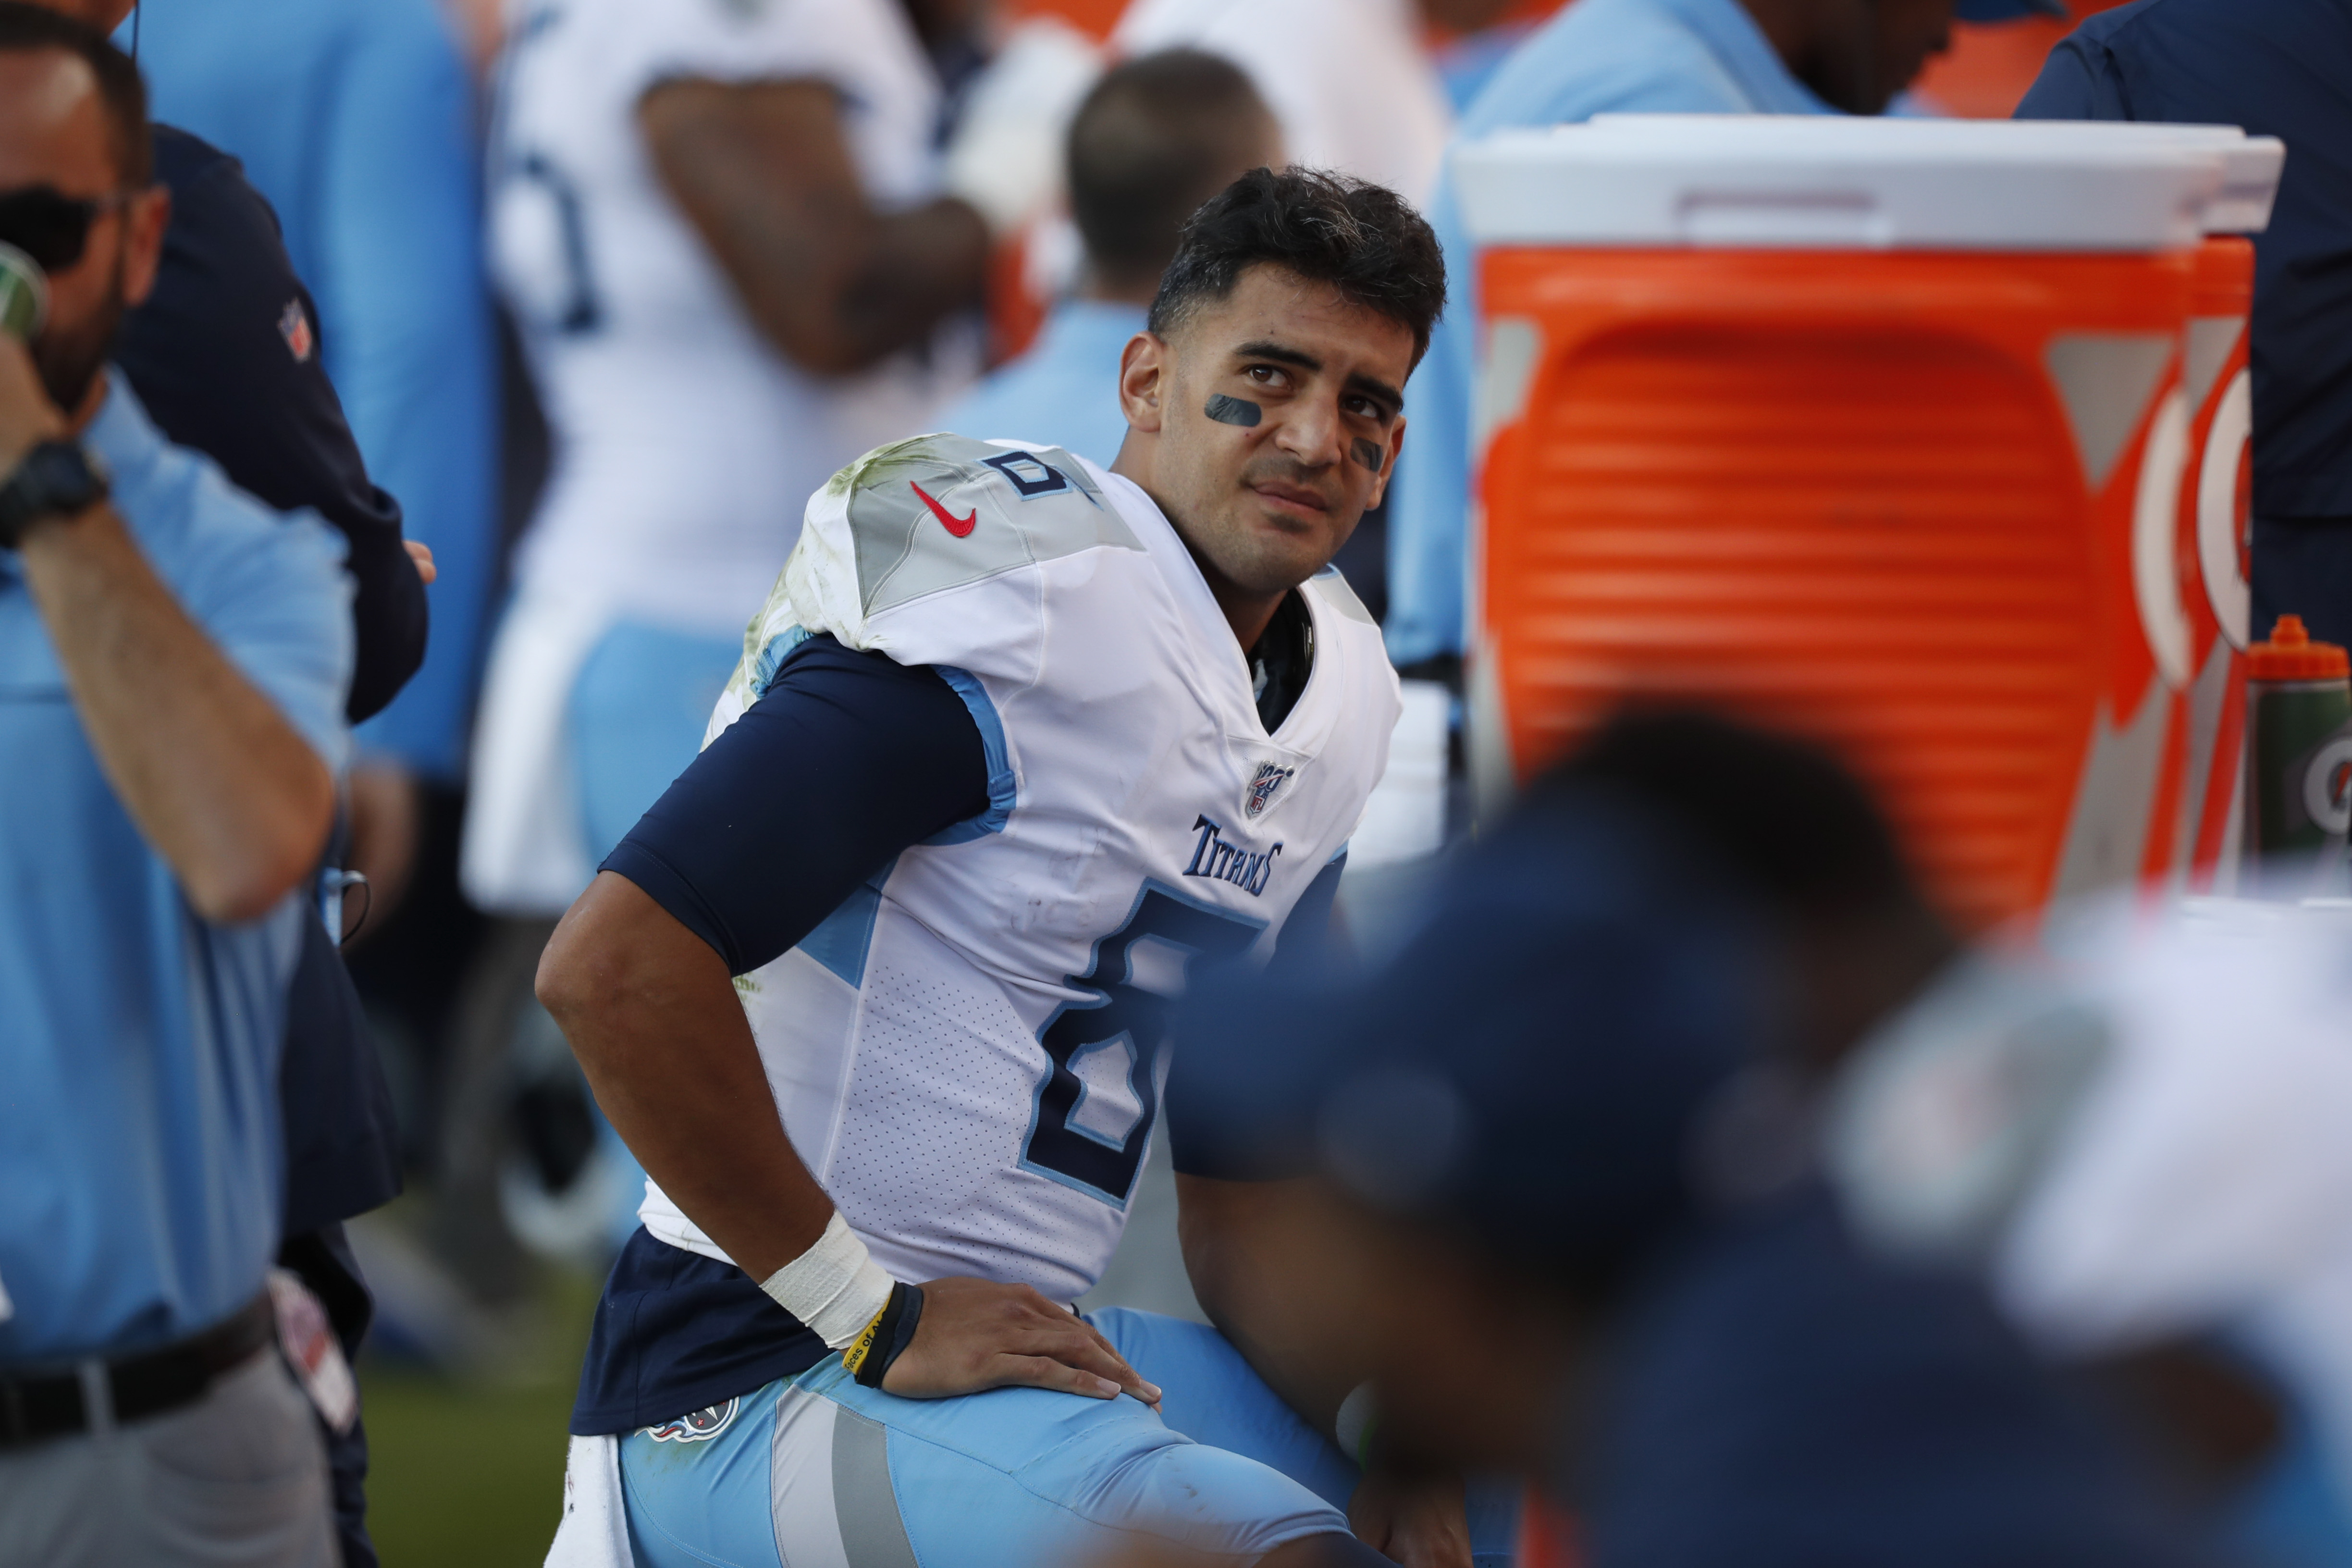 Mariota, Winston may have cloudy futures with shaky showings